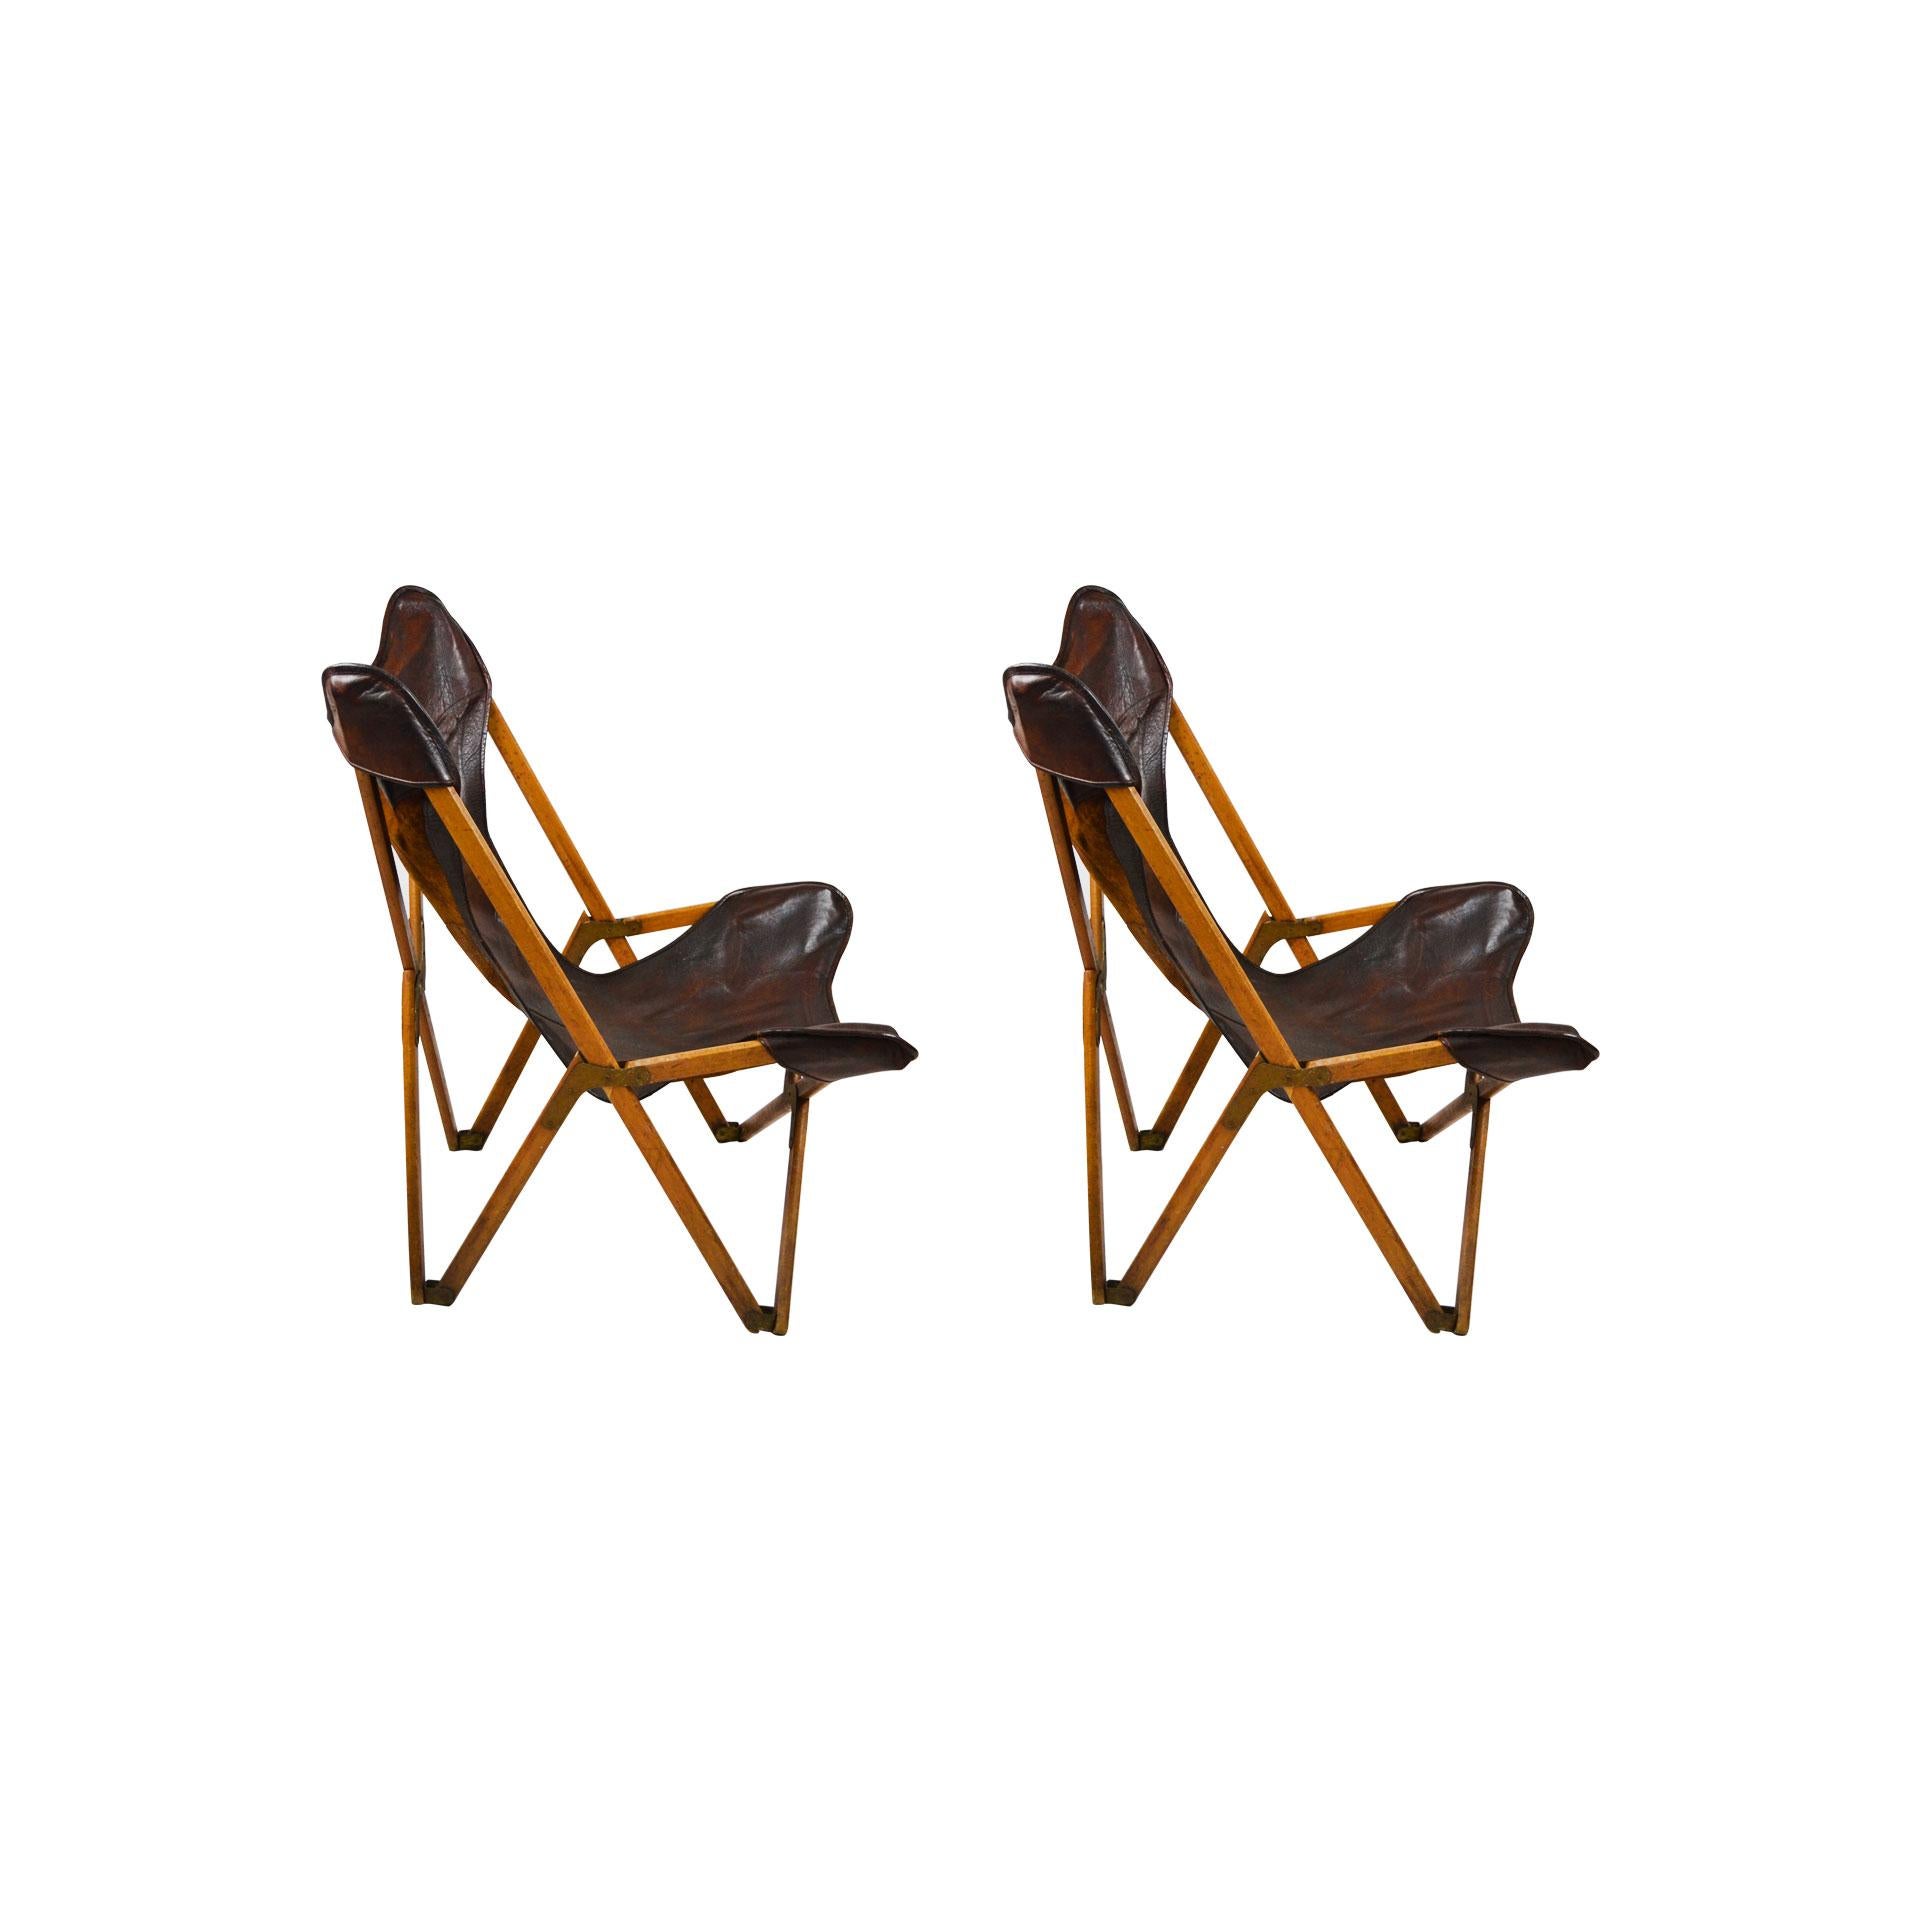 Mid-Century Modern 20th Century Paolo Viganò Tripolina Folding Armchairs in Leather and Wood, Pair